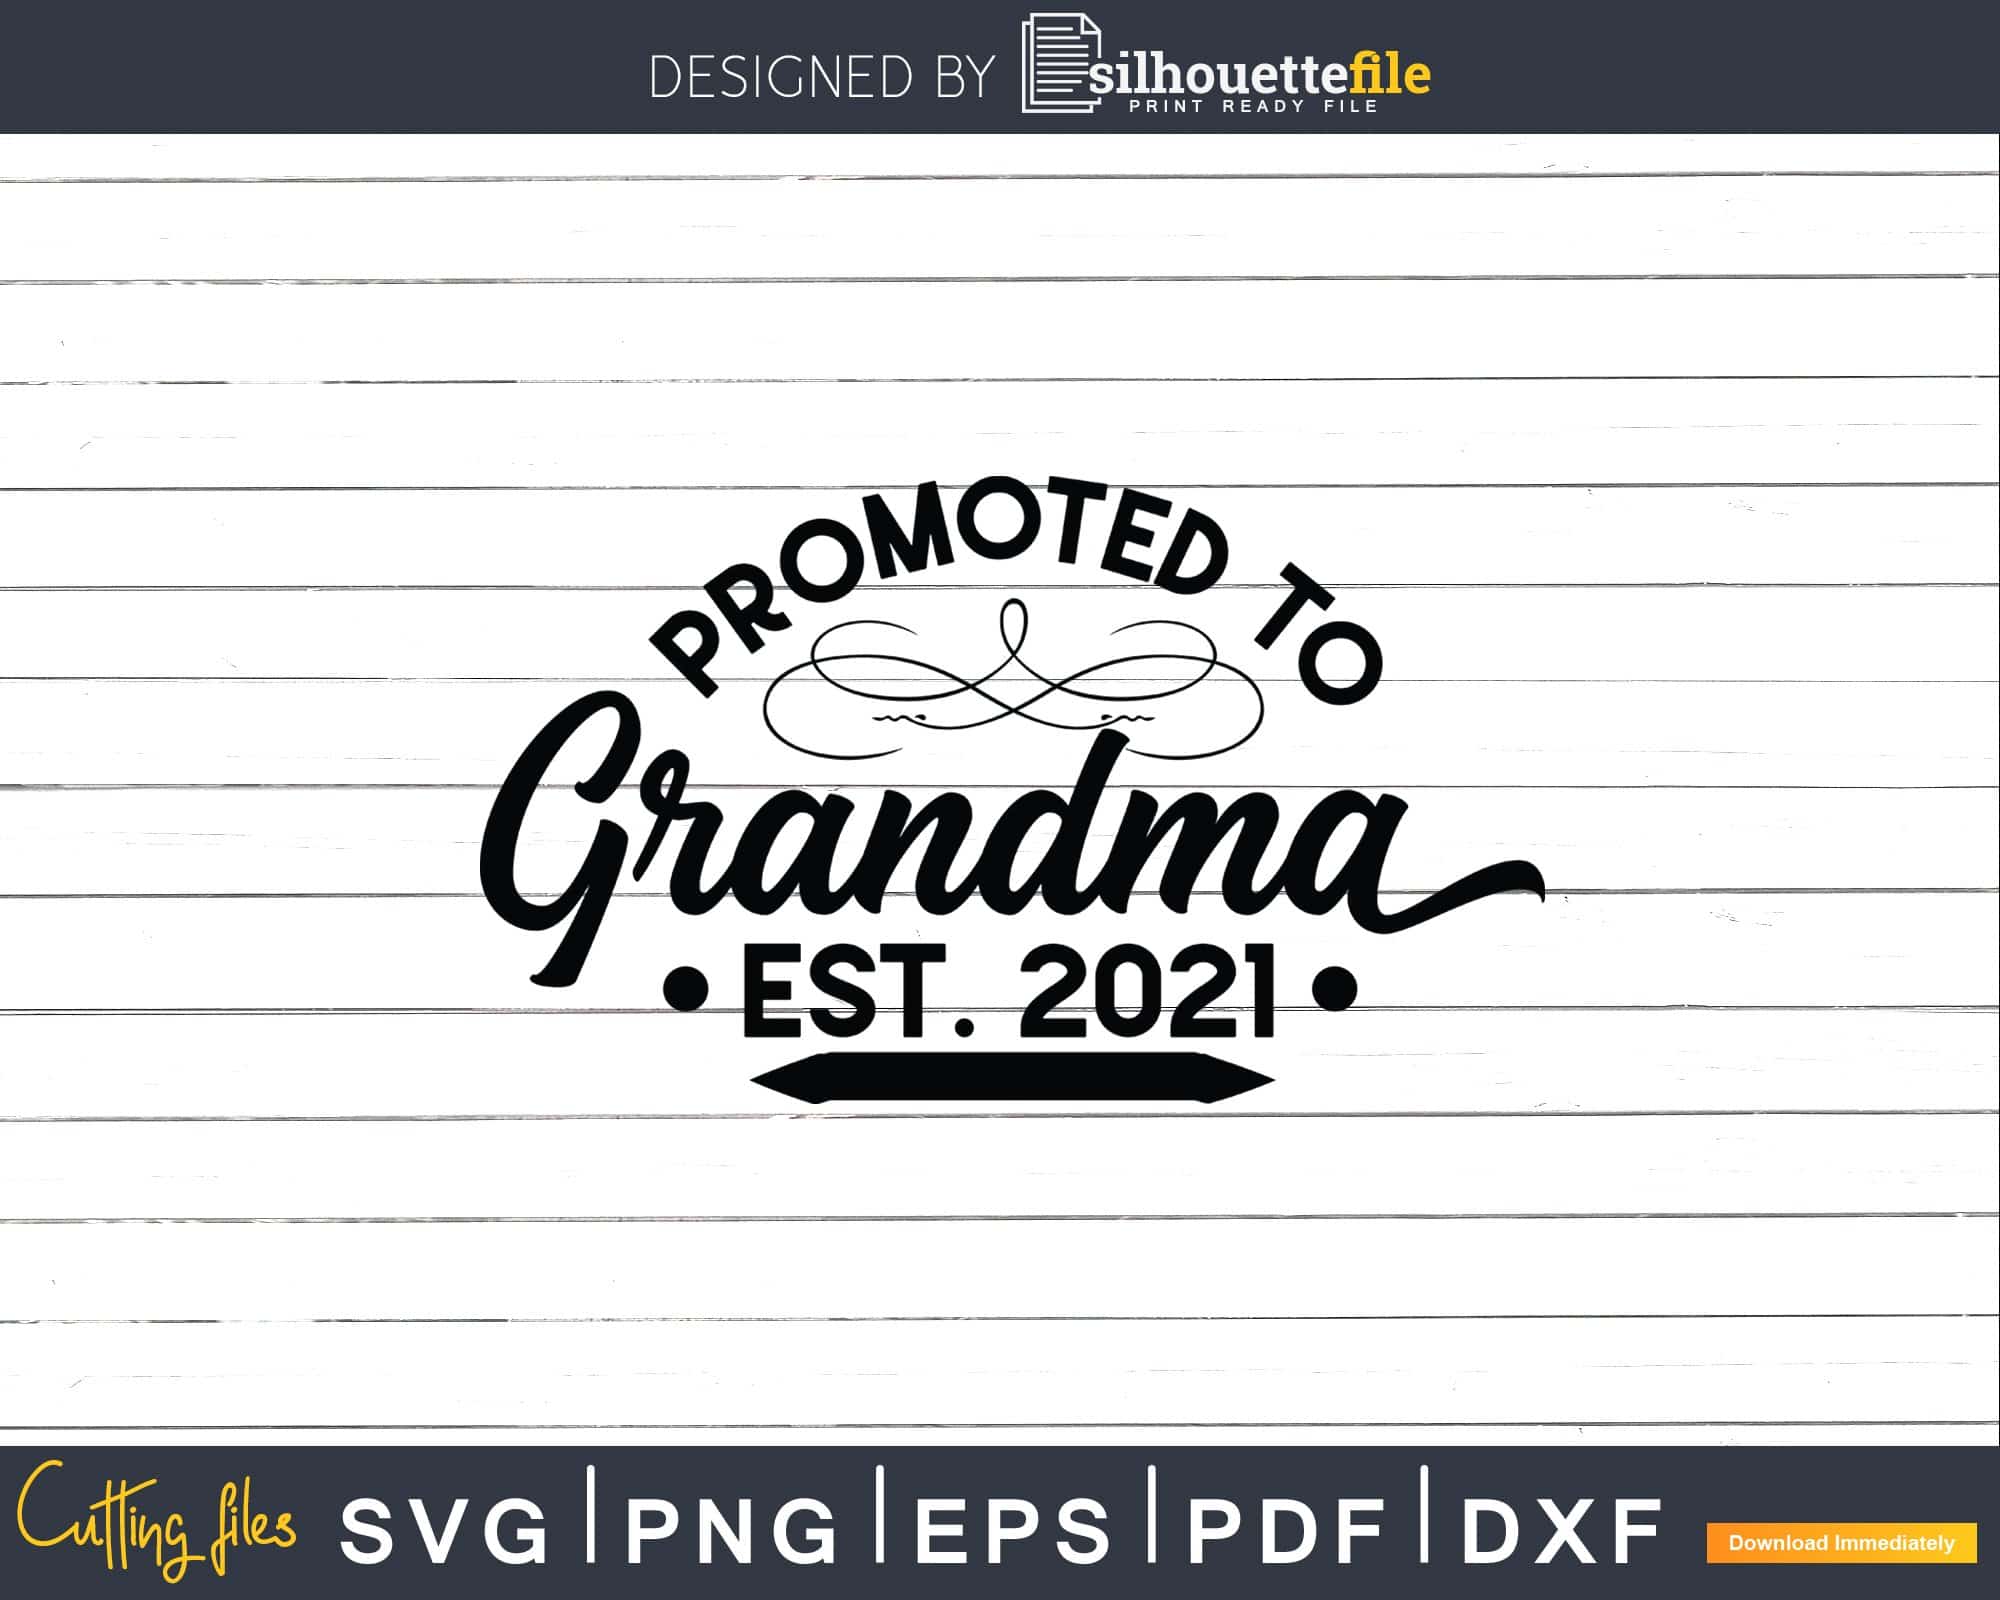 Download Grandmother Svg Promoted To Grandma Svg Dxf Png Instant Download Grandma Svg Clip Art Art Collectibles